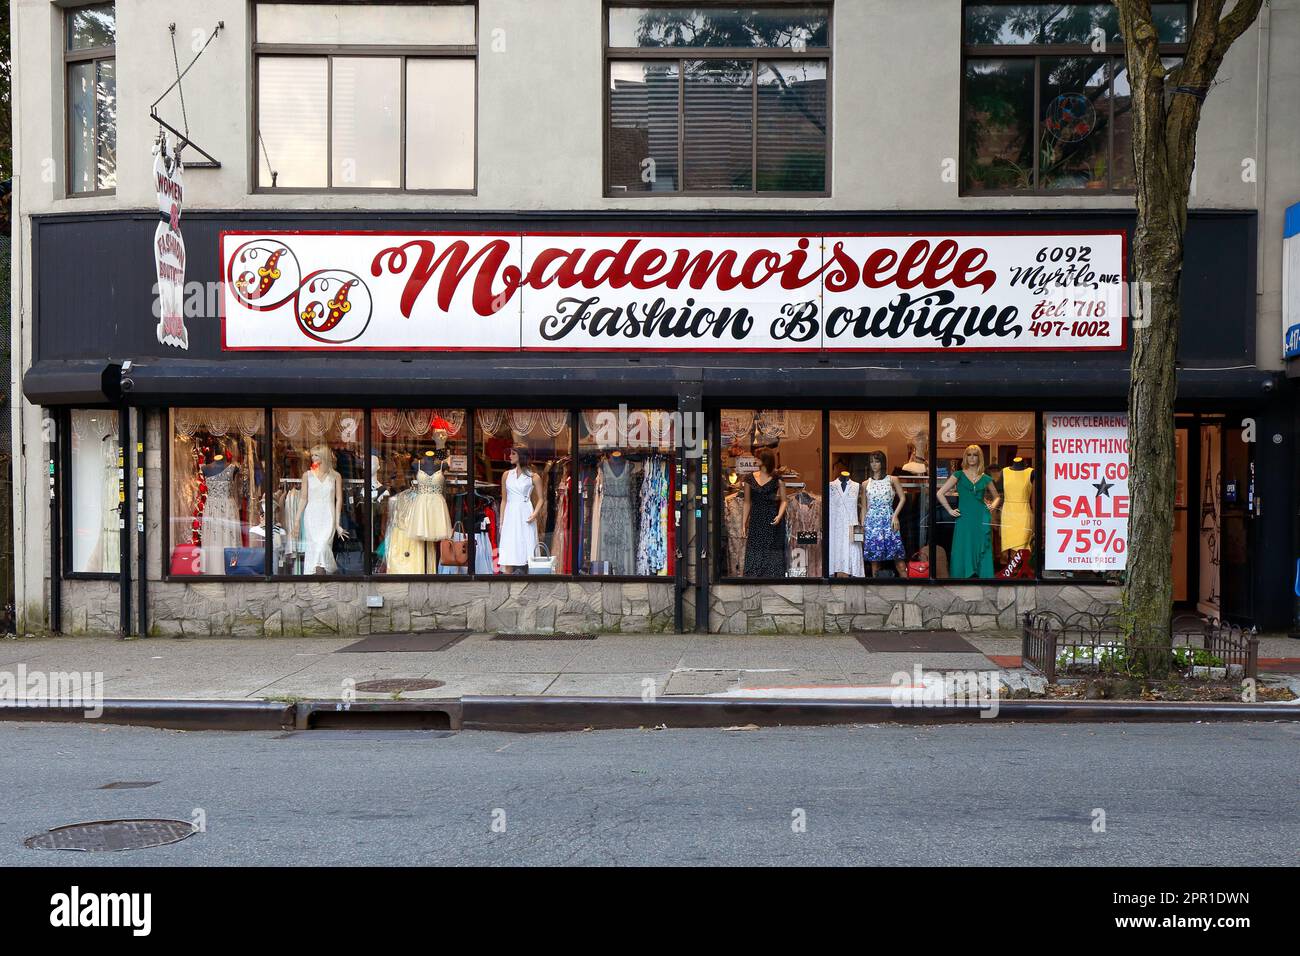 Mademoiselle Fashion Boutique, 6090 Myrtle Ave, Queens. NYC storefront photo of a woman's clothing store in Ridgewood. Stock Photo